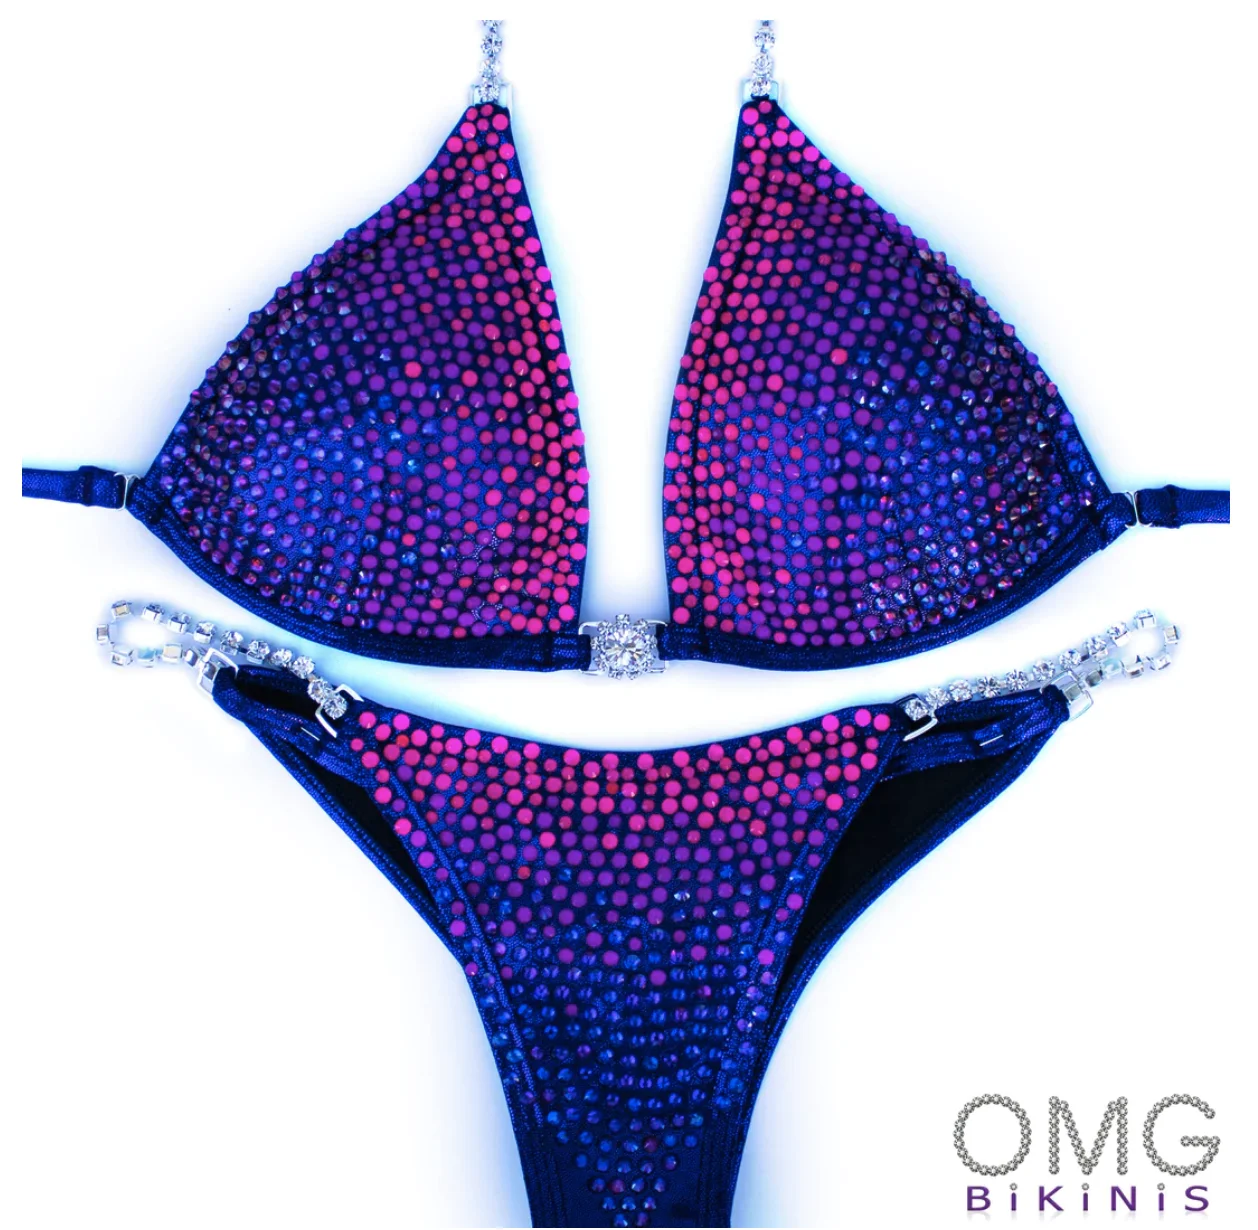 OMG Bikinis | Competition Suits, Posing Suits and Swimwear